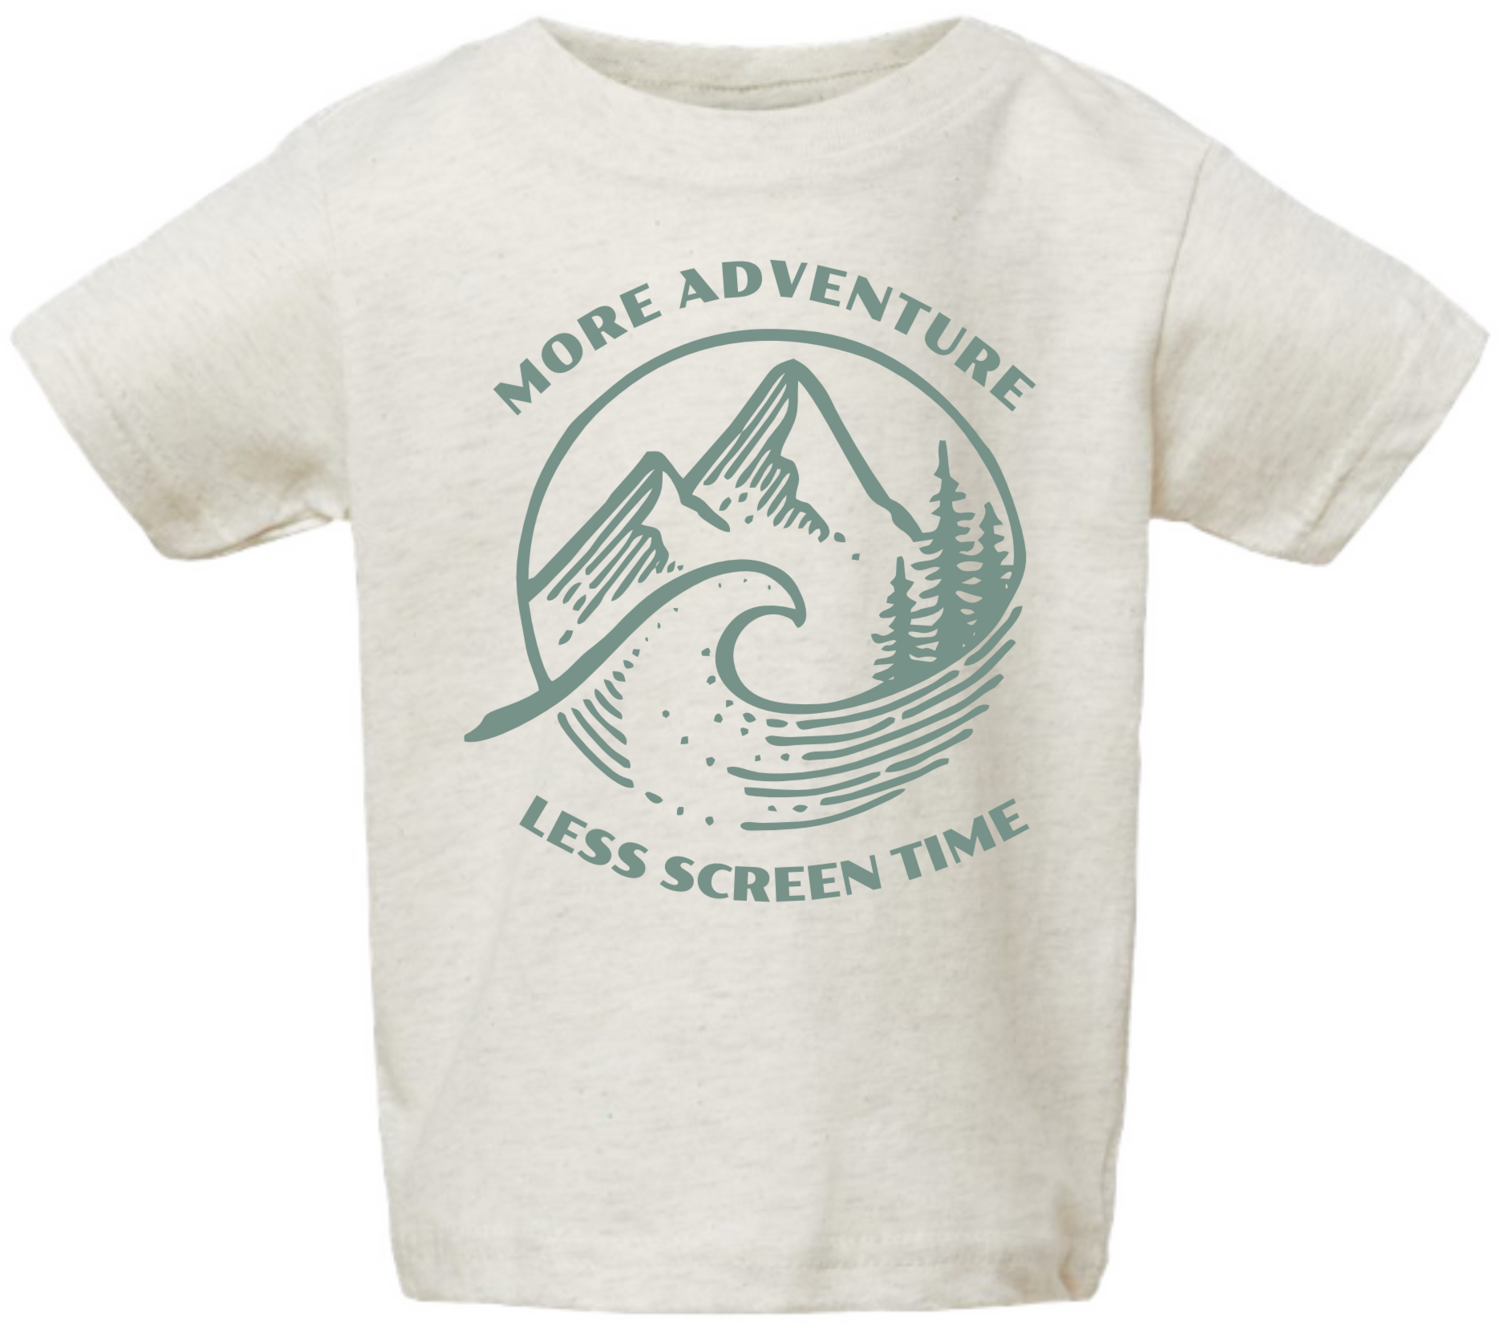 MORE adventure LESS screentime Tee, White, Infant